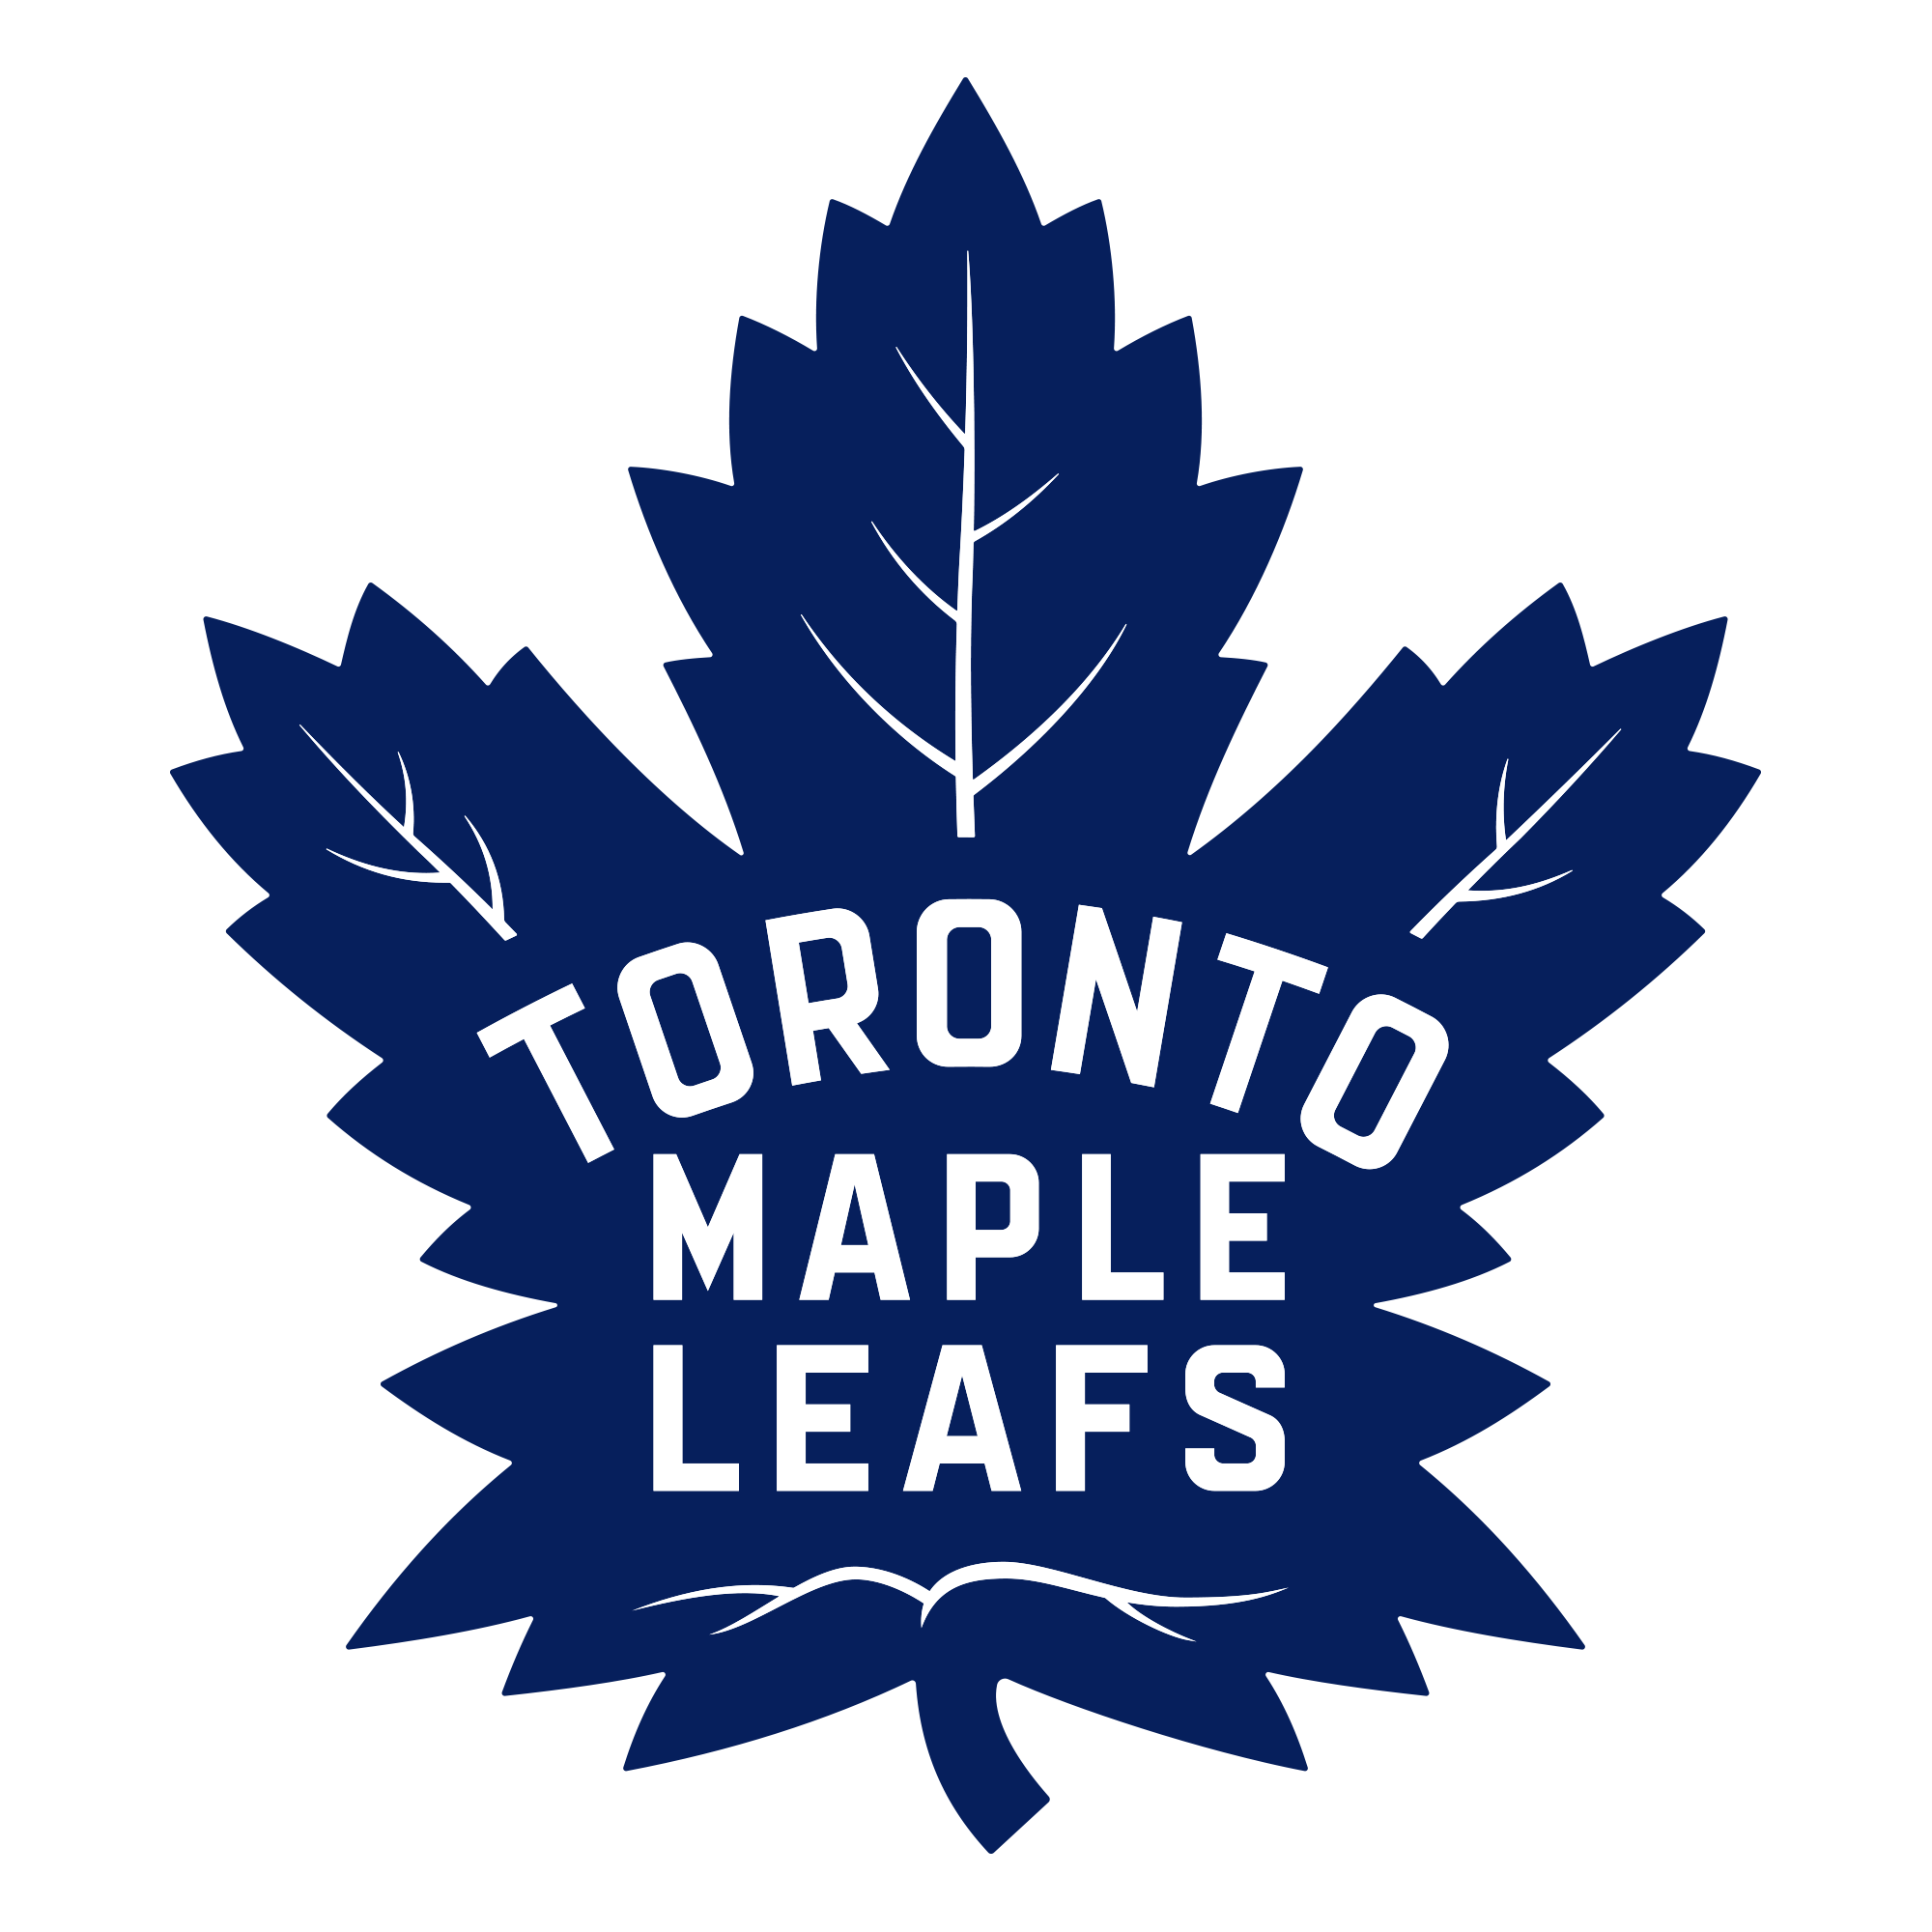 This documentary perfectly describes the agony of being a Maple Leafs fan